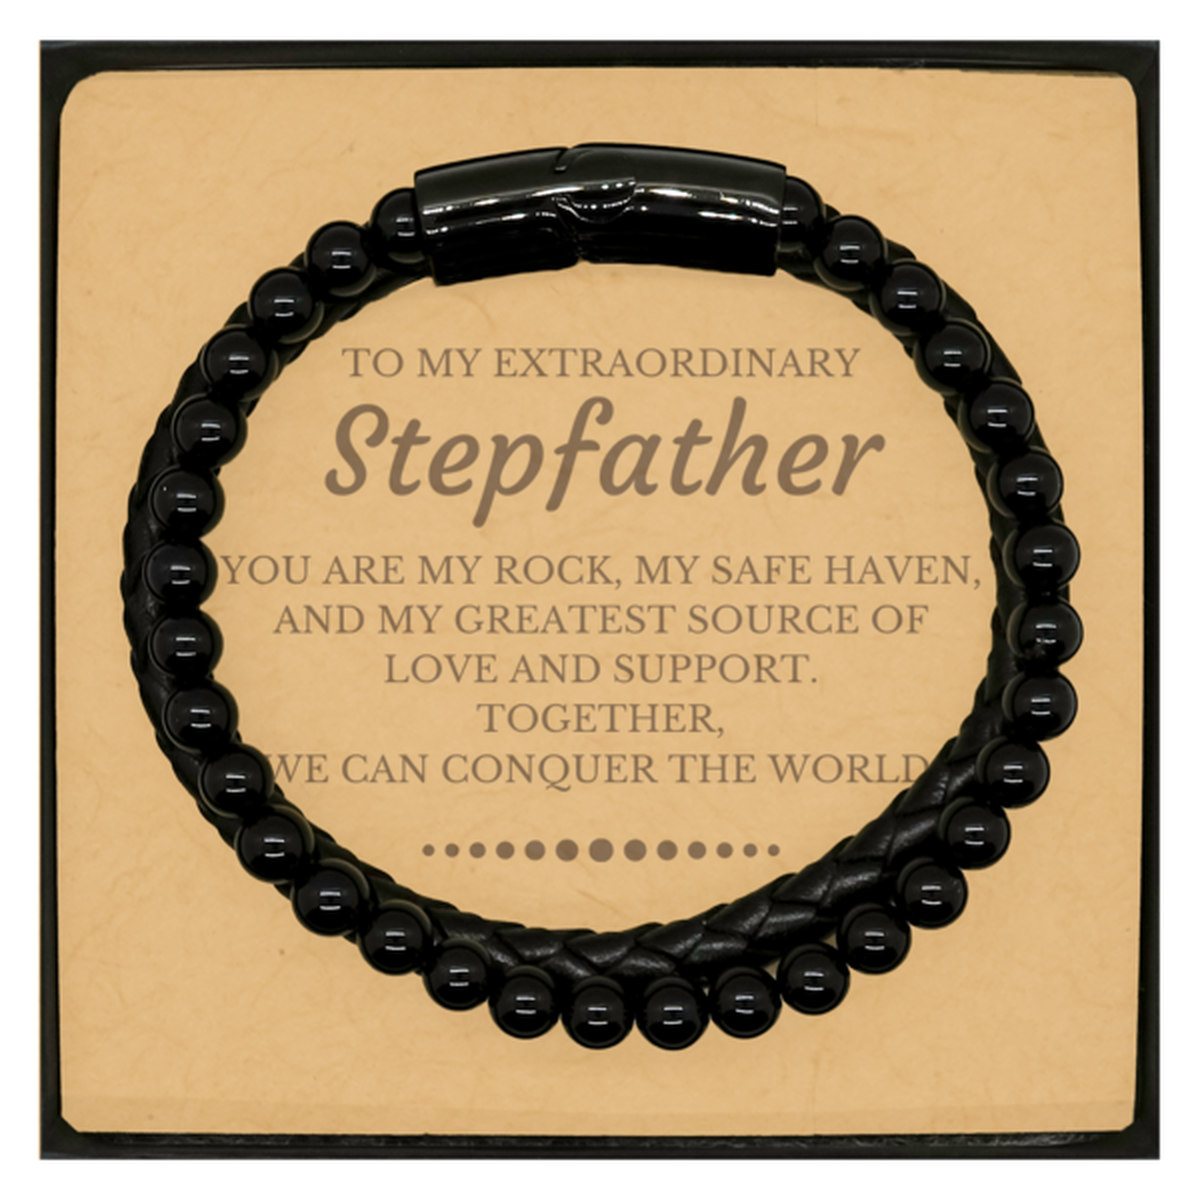 To My Extraordinary Stepfather Gifts, Together, we can conquer the world, Birthday Christmas Stone Leather Bracelets For Stepfather, Christmas Gifts For Stepfather